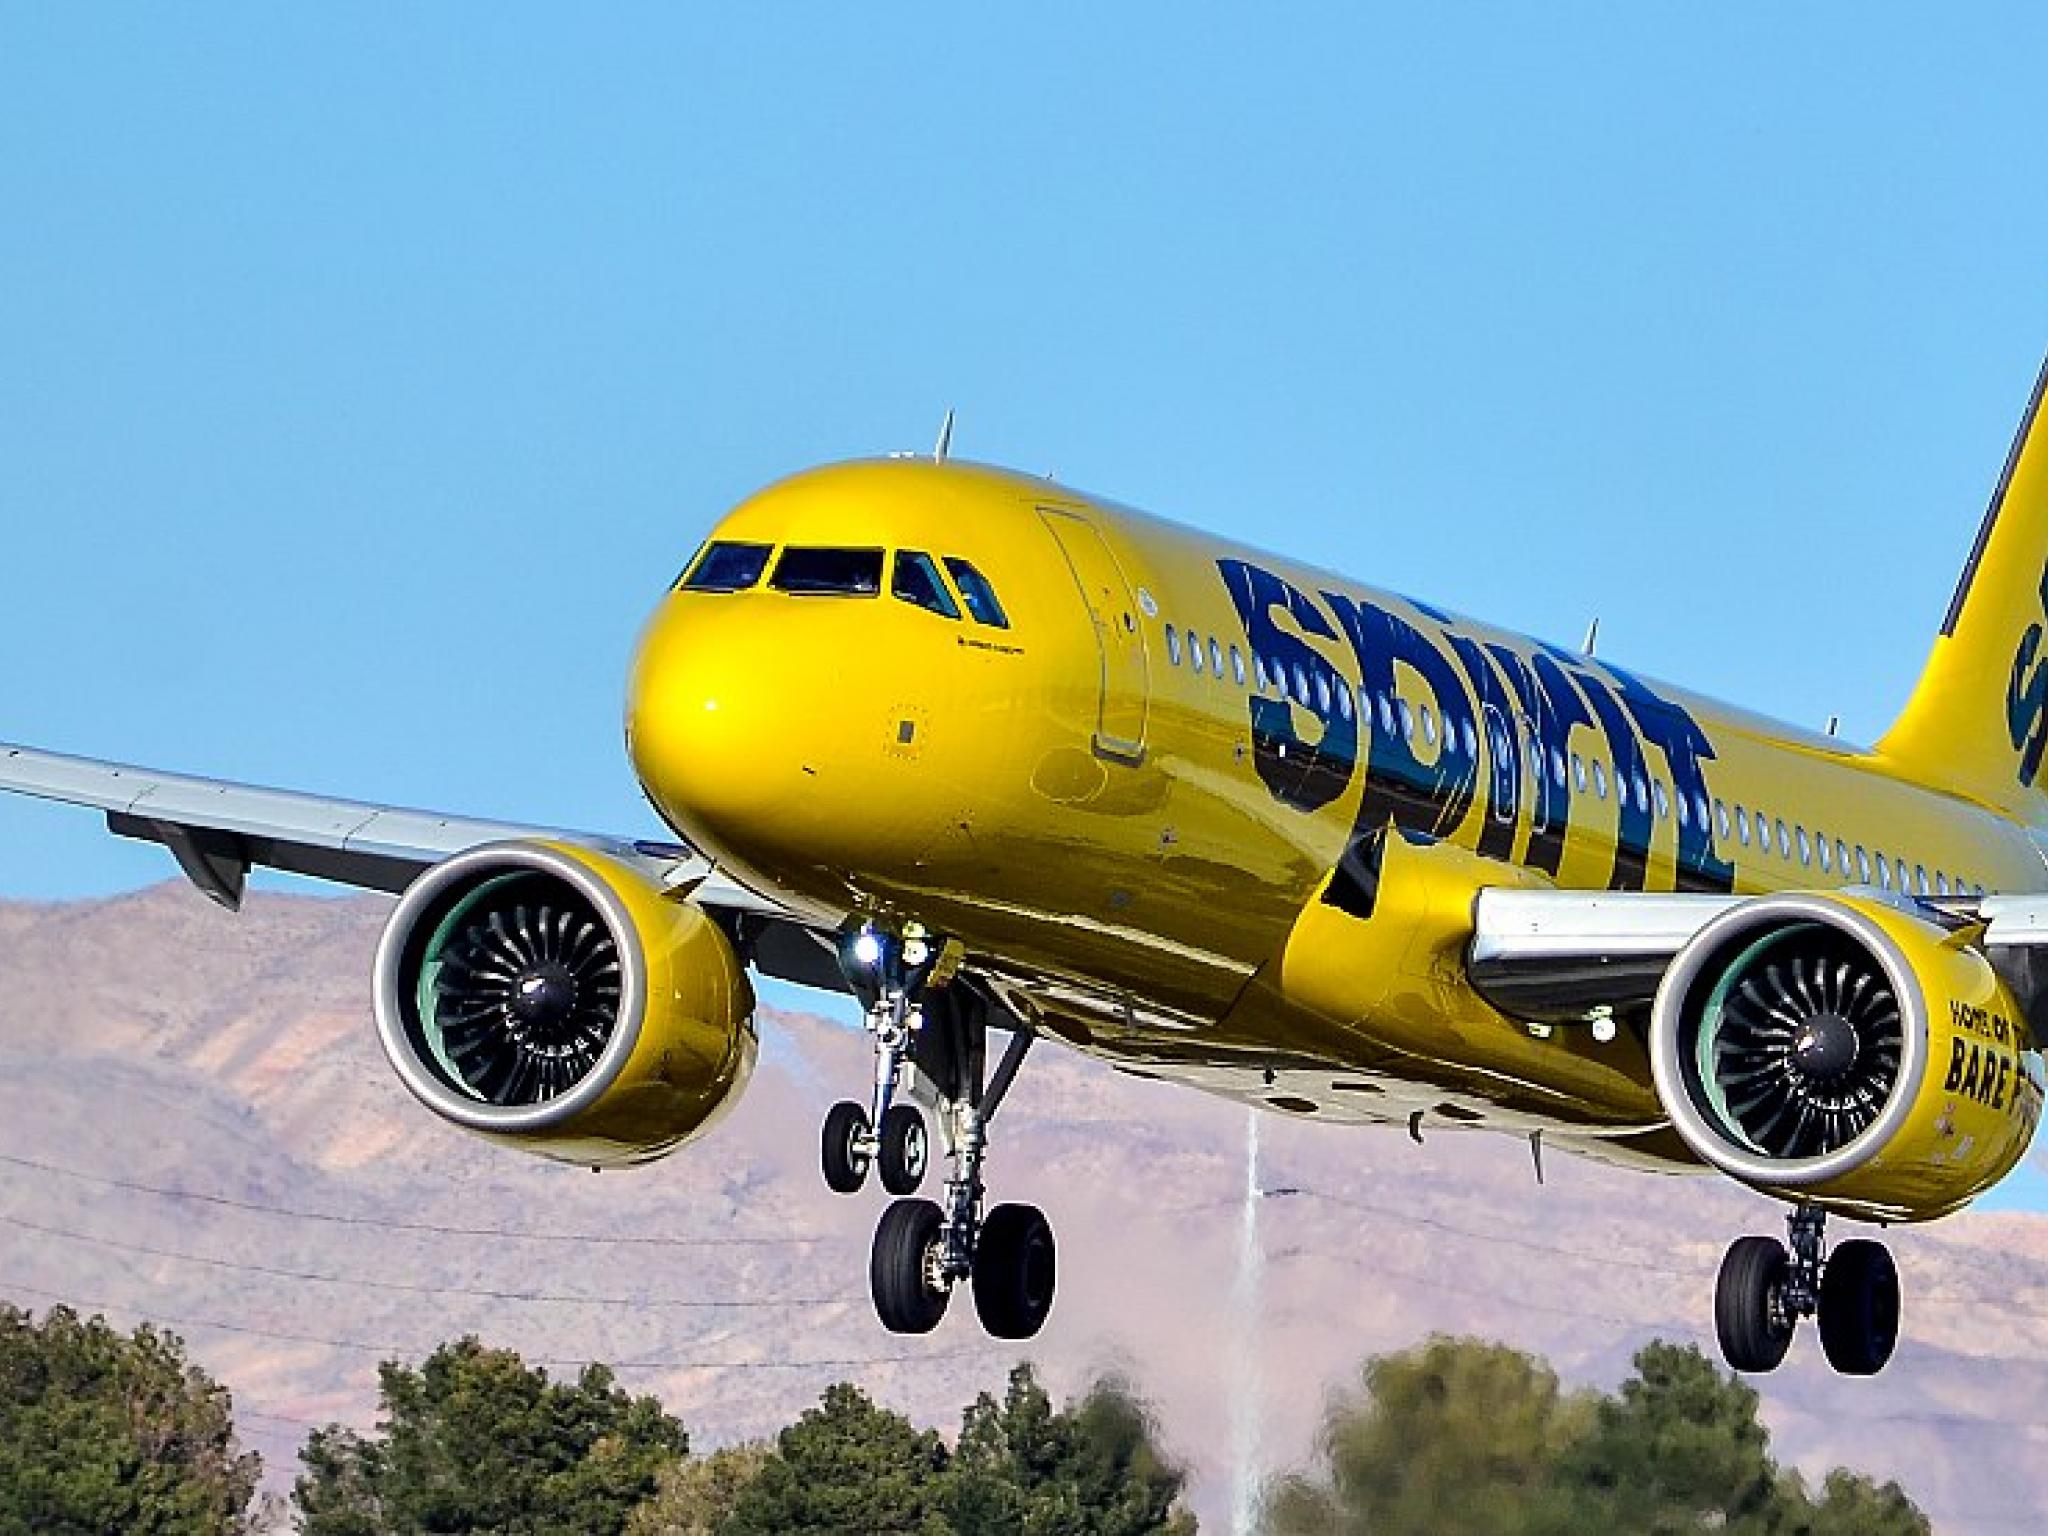  spirit-airlines-stock-is-taking-off-monday-heres-why 